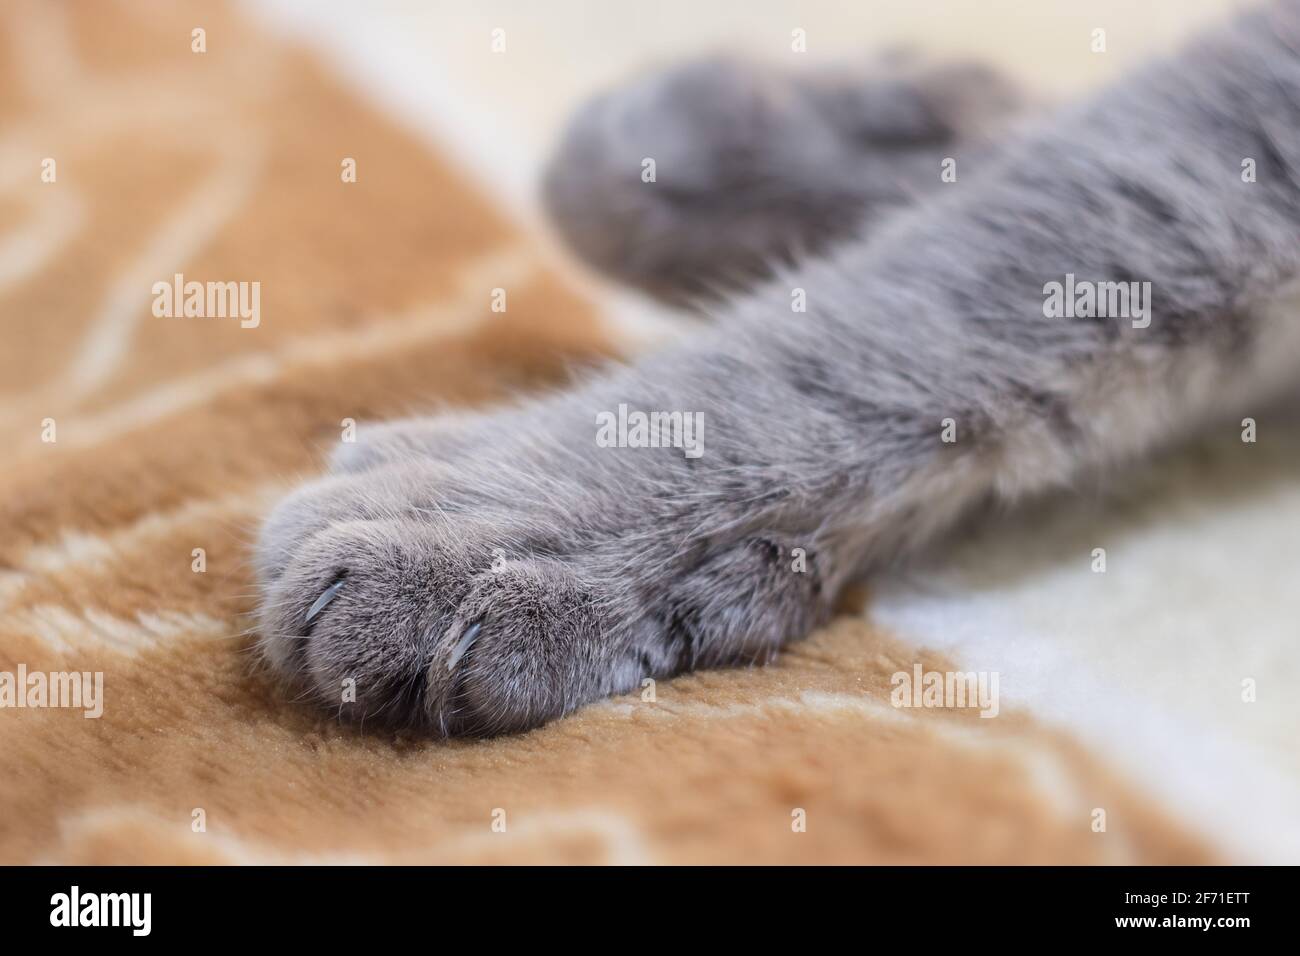 Detail shot of soft Cat paws. Stock Photo